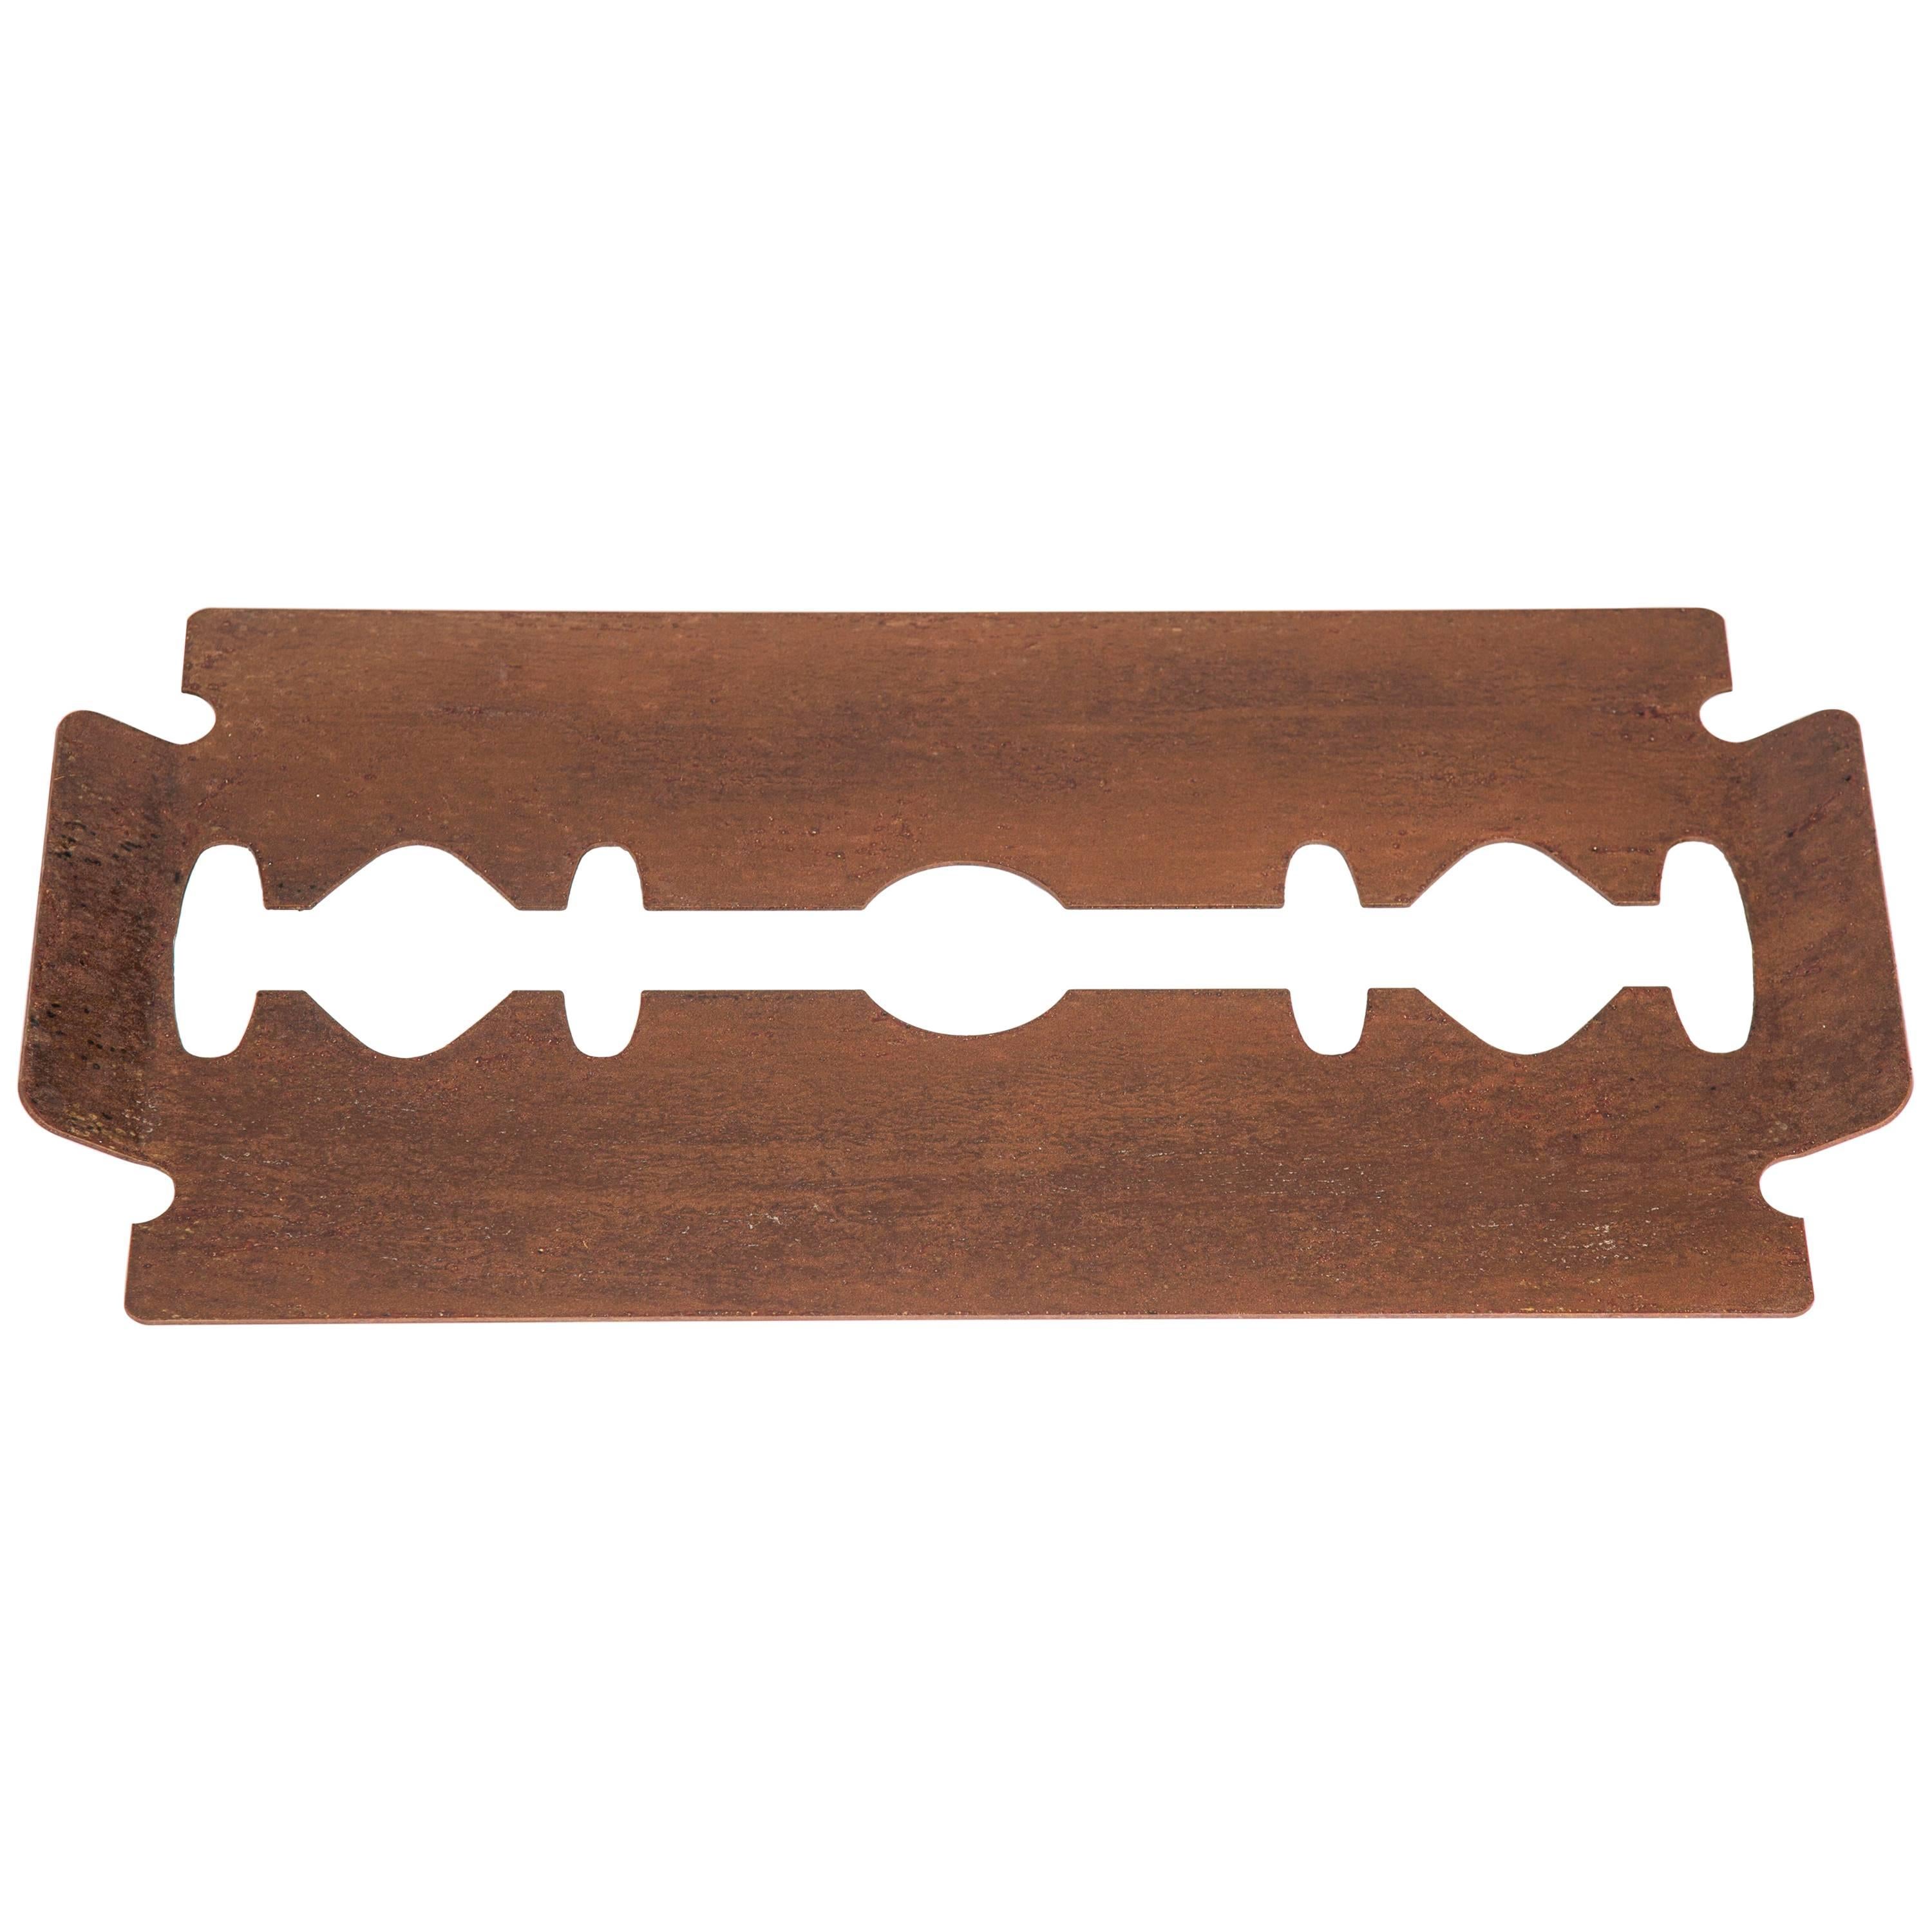 Edged Tray Rusty-Colored Plating, Minimalist Modern For Sale